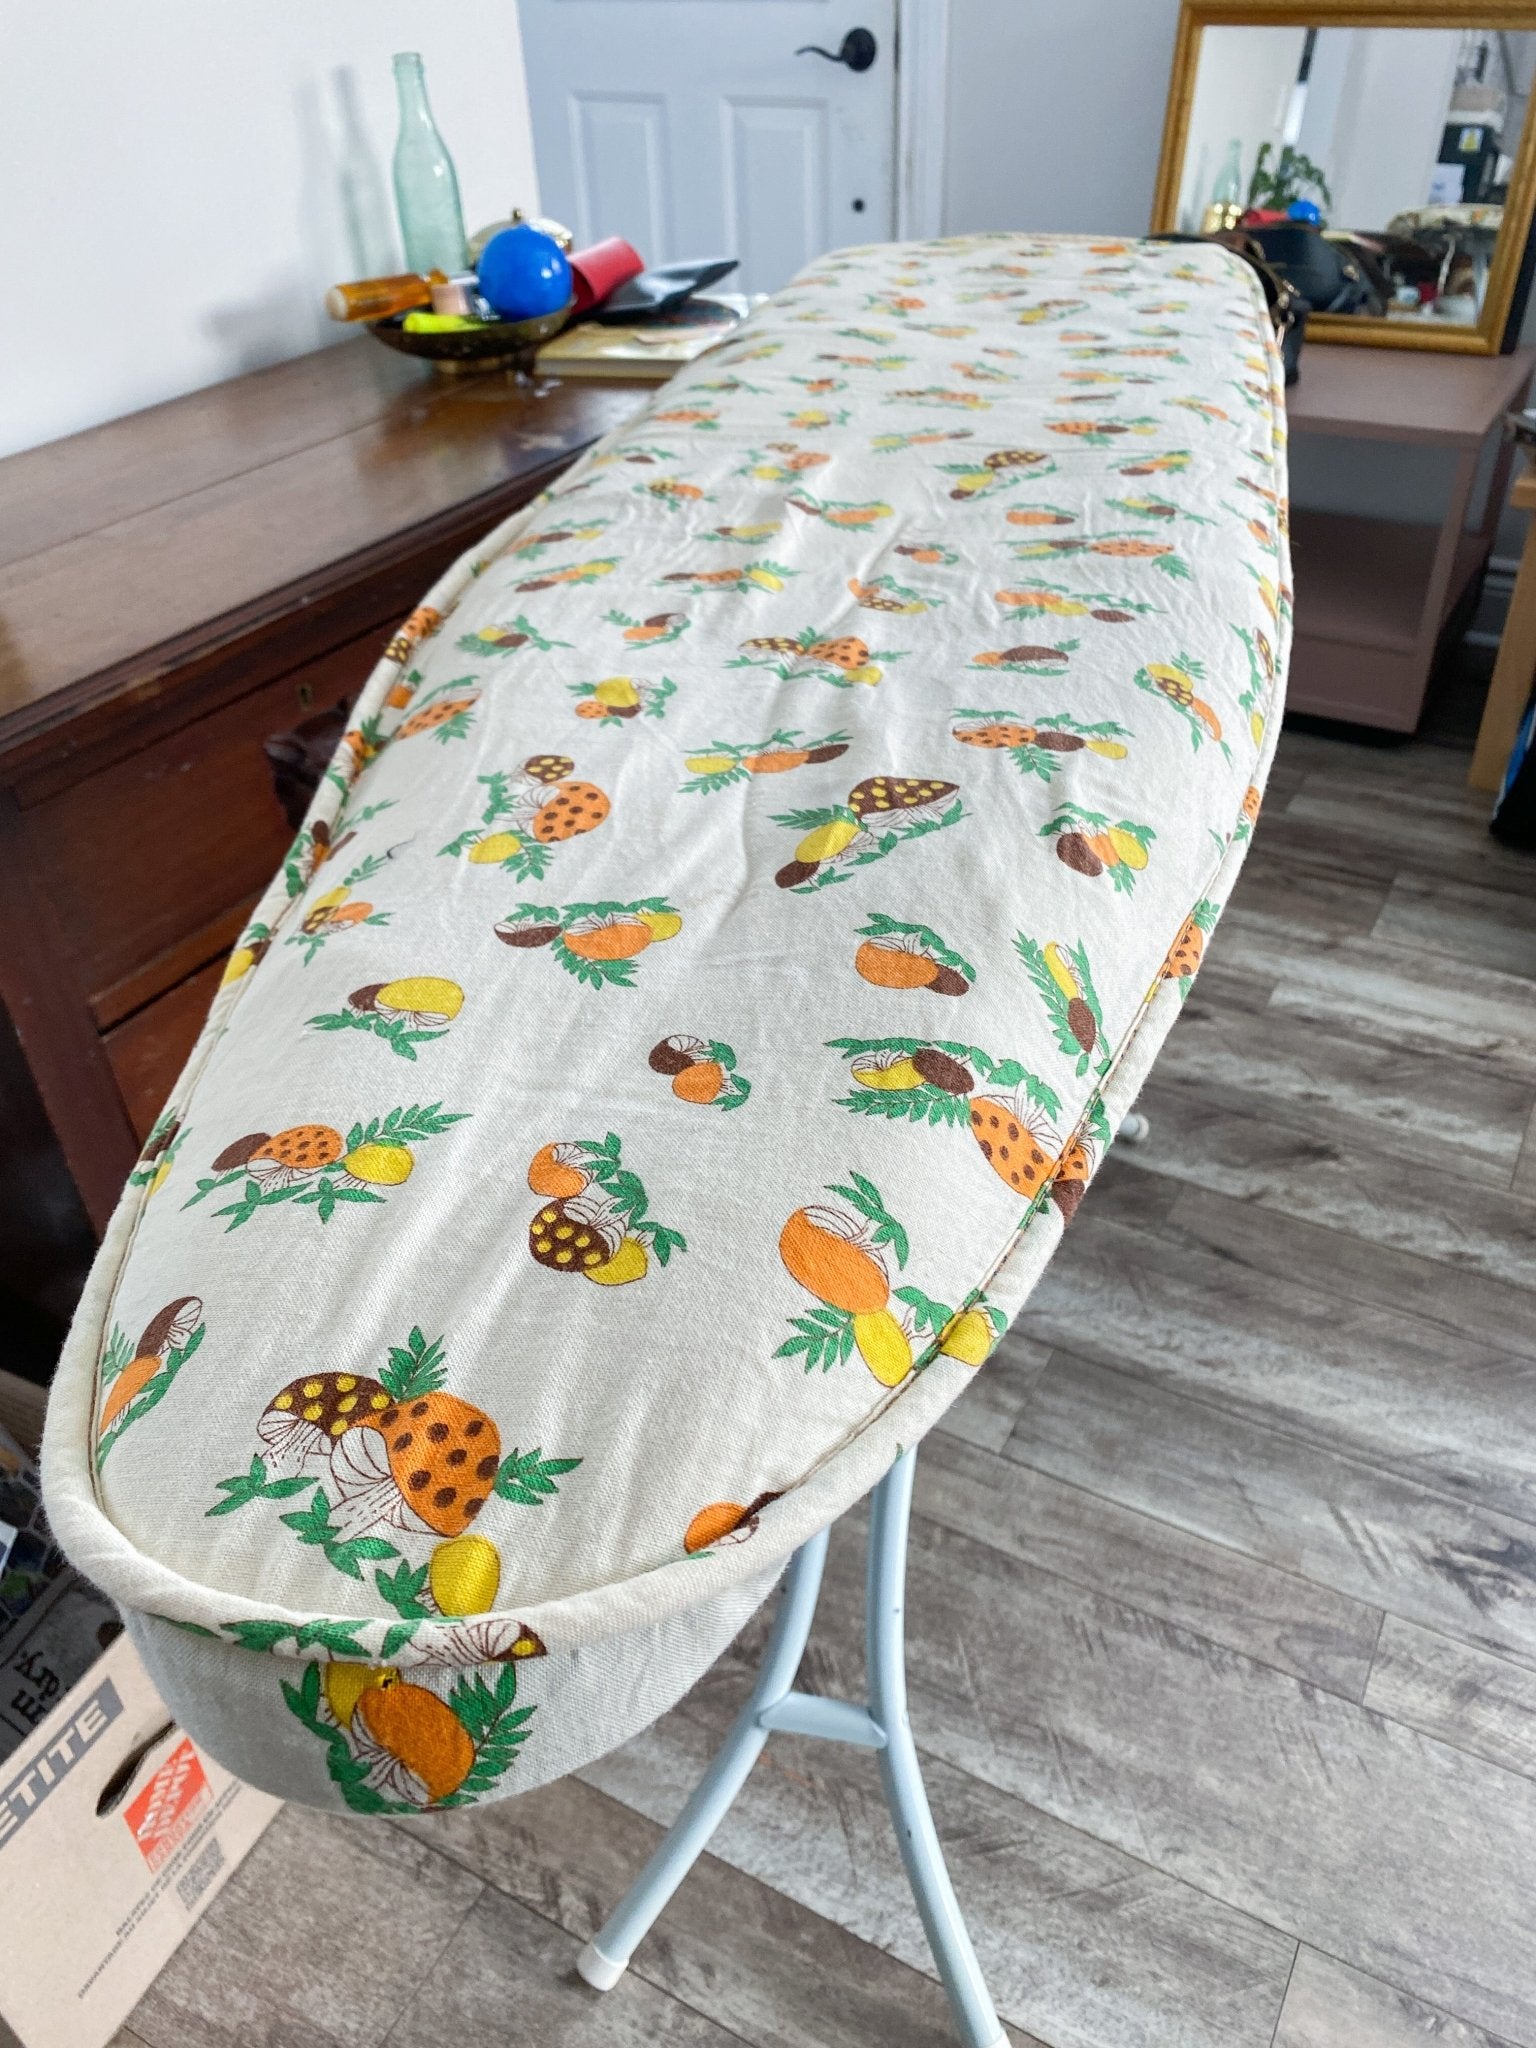 The mushroom fabric on the ironing board, noted are the edges that are expertly sewn. The cover fits over a standard ironing board and the fabric includes colours of orange, brown and yellow mushrooms. 